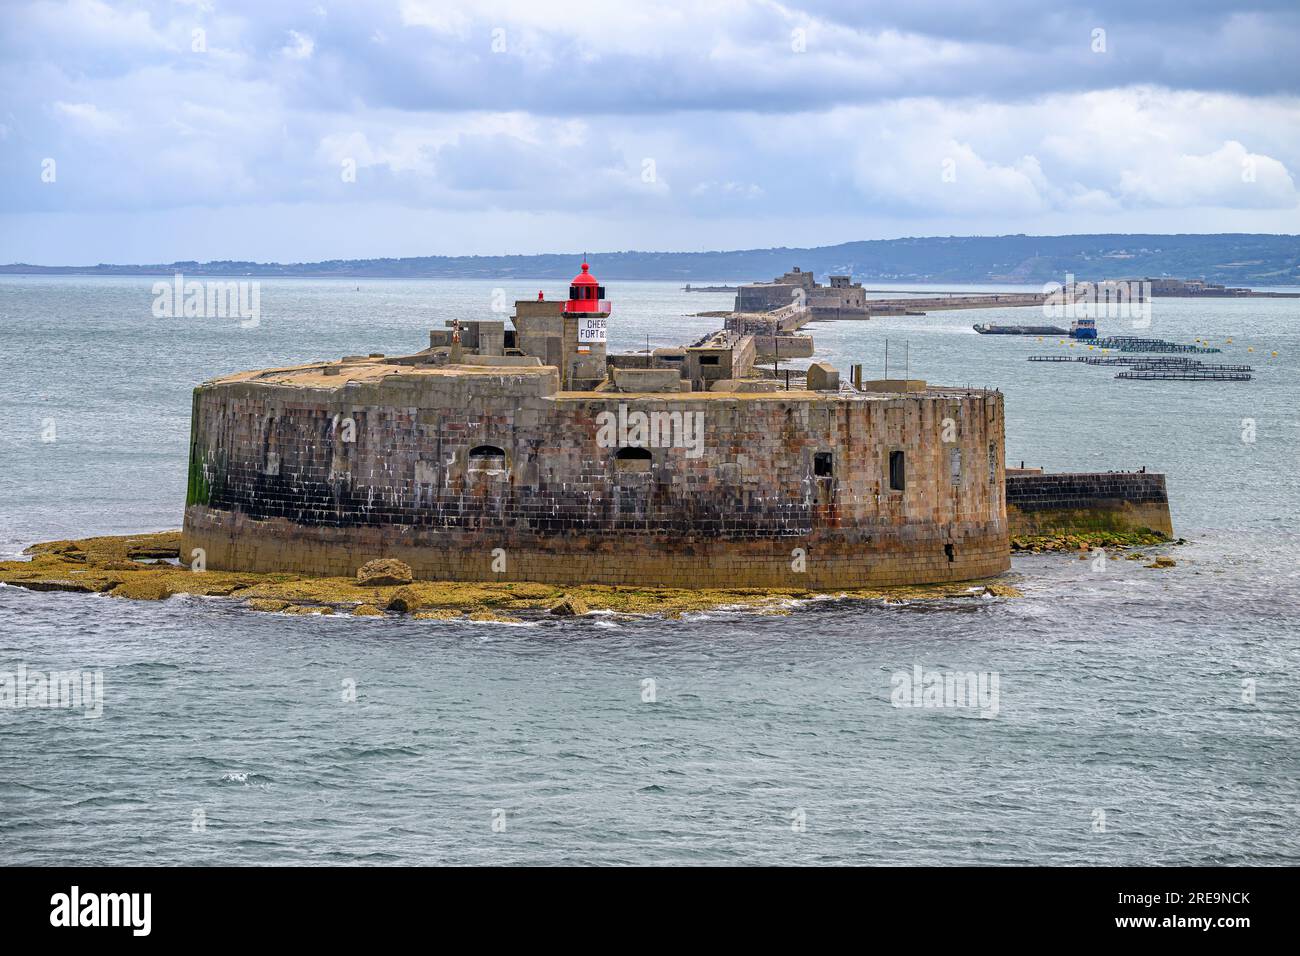 The West Fort located at the approaches to Cherbourg Harbour in Normandy, France. Stock Photo